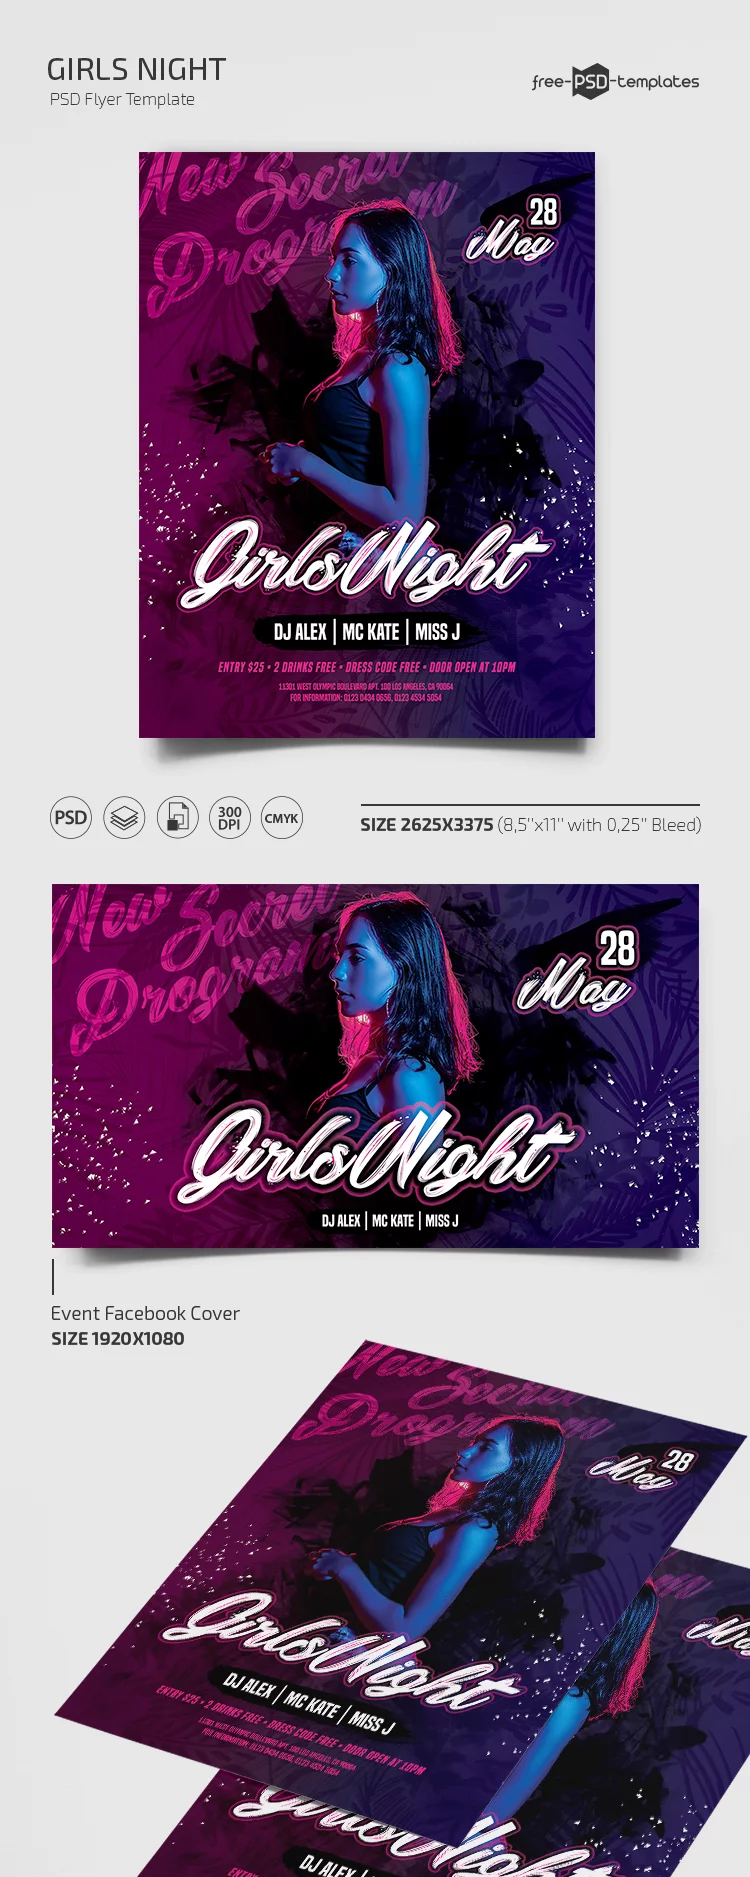 Free Girls Night Flyer Template in PSD